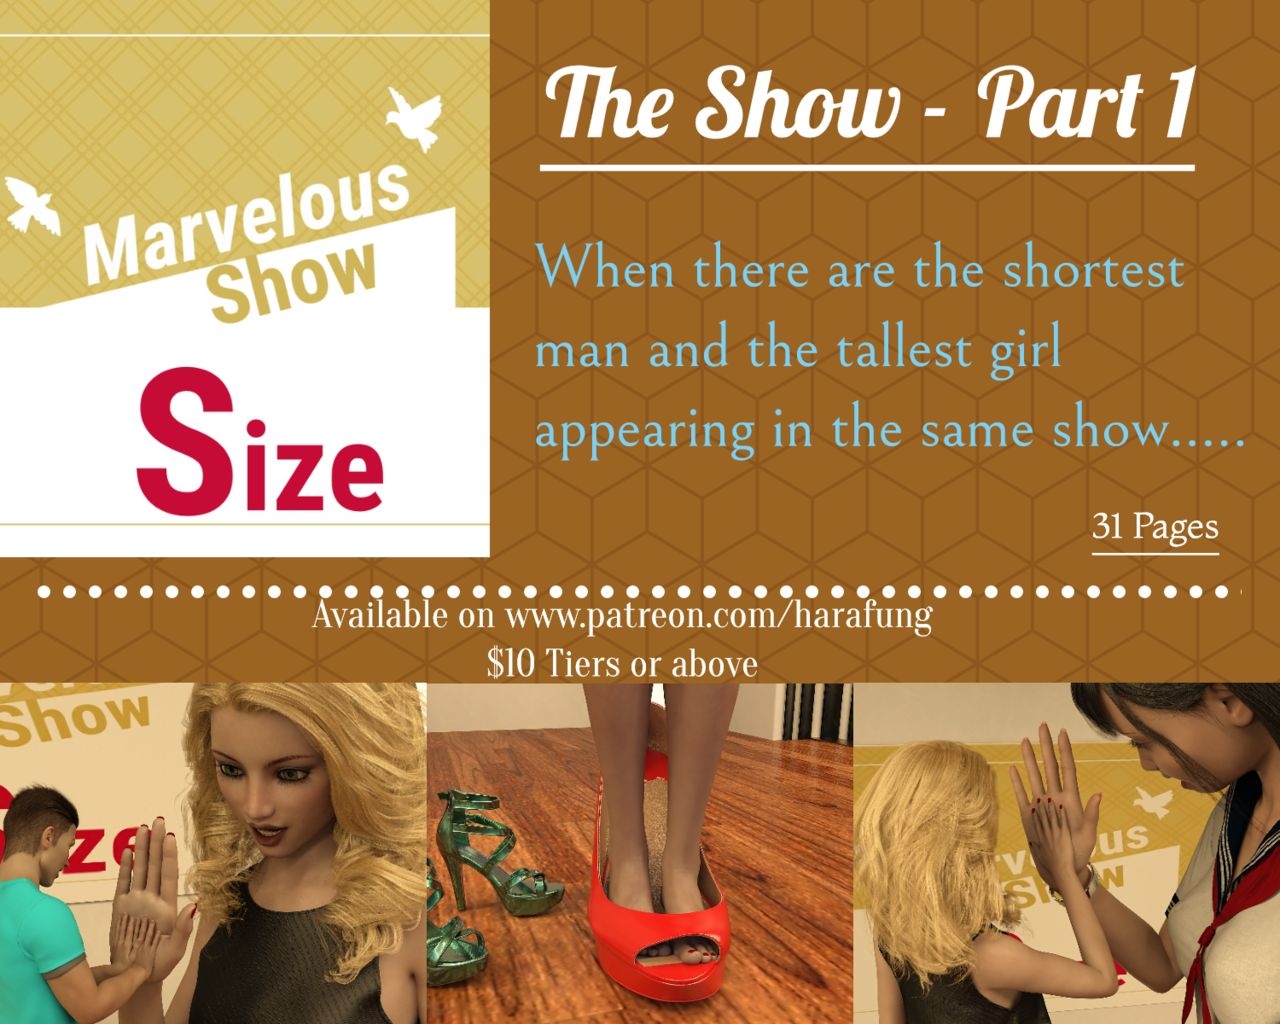 Harafung - The Show (1-4) 0